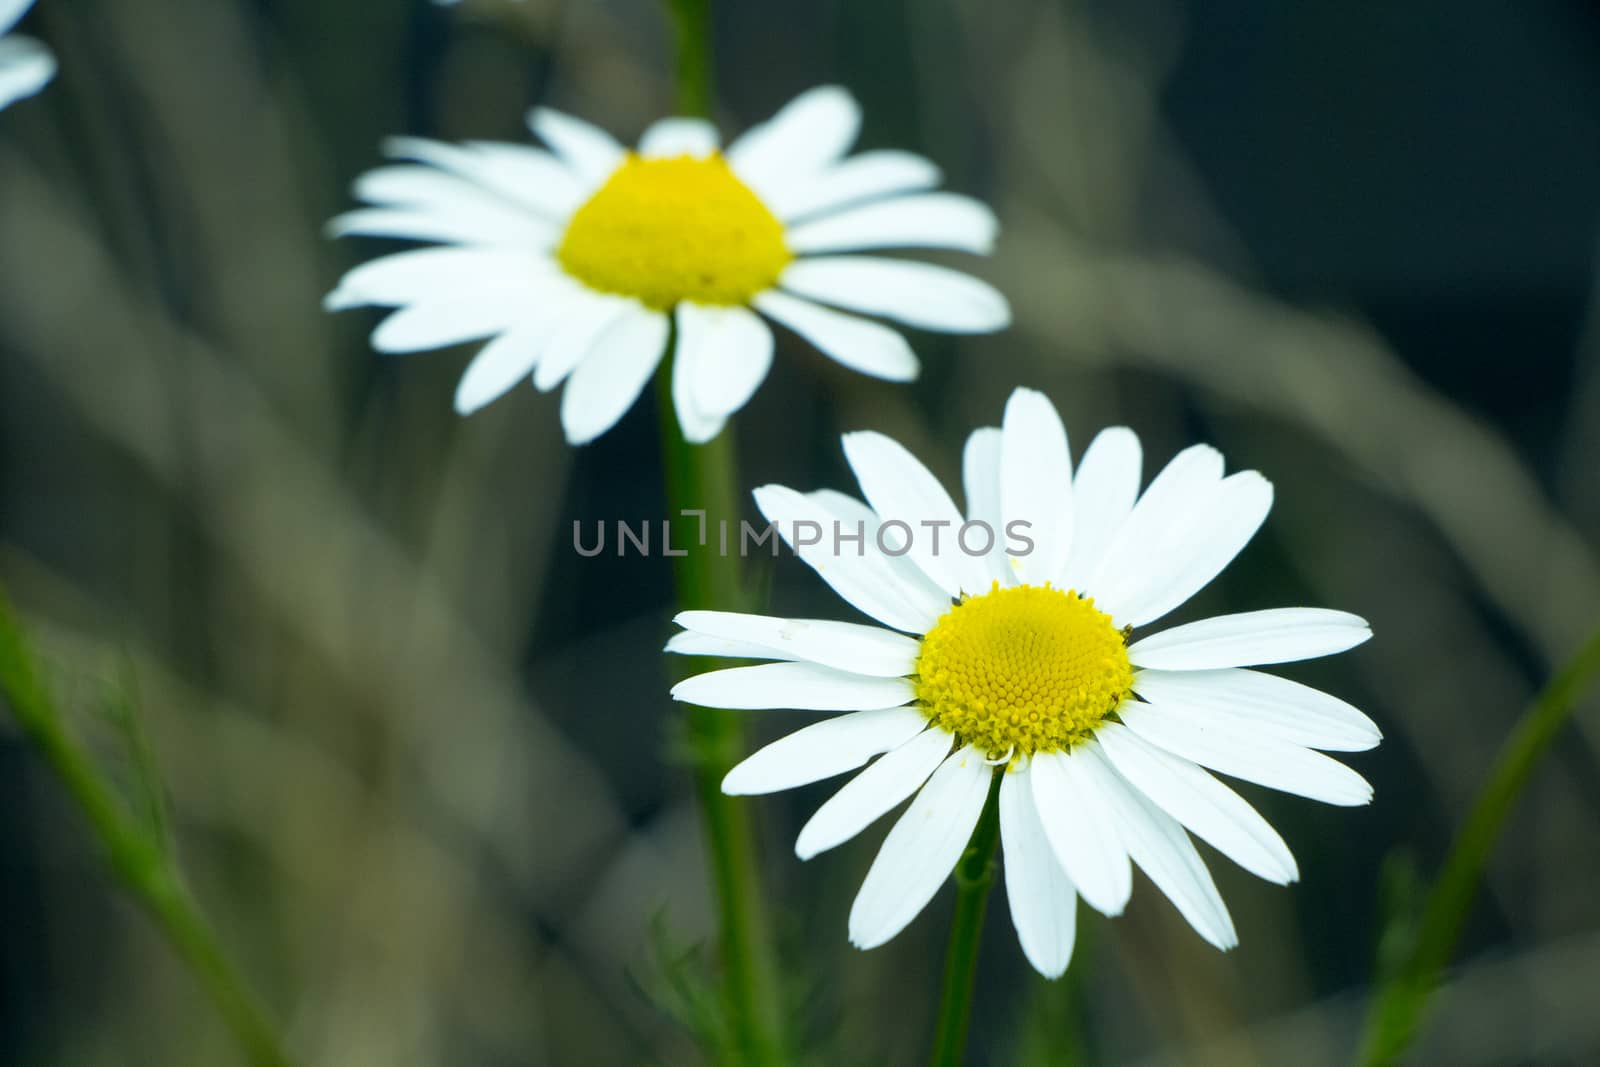 Small White and Yellow Flowers by Mads_Hjorth_Jakobsen